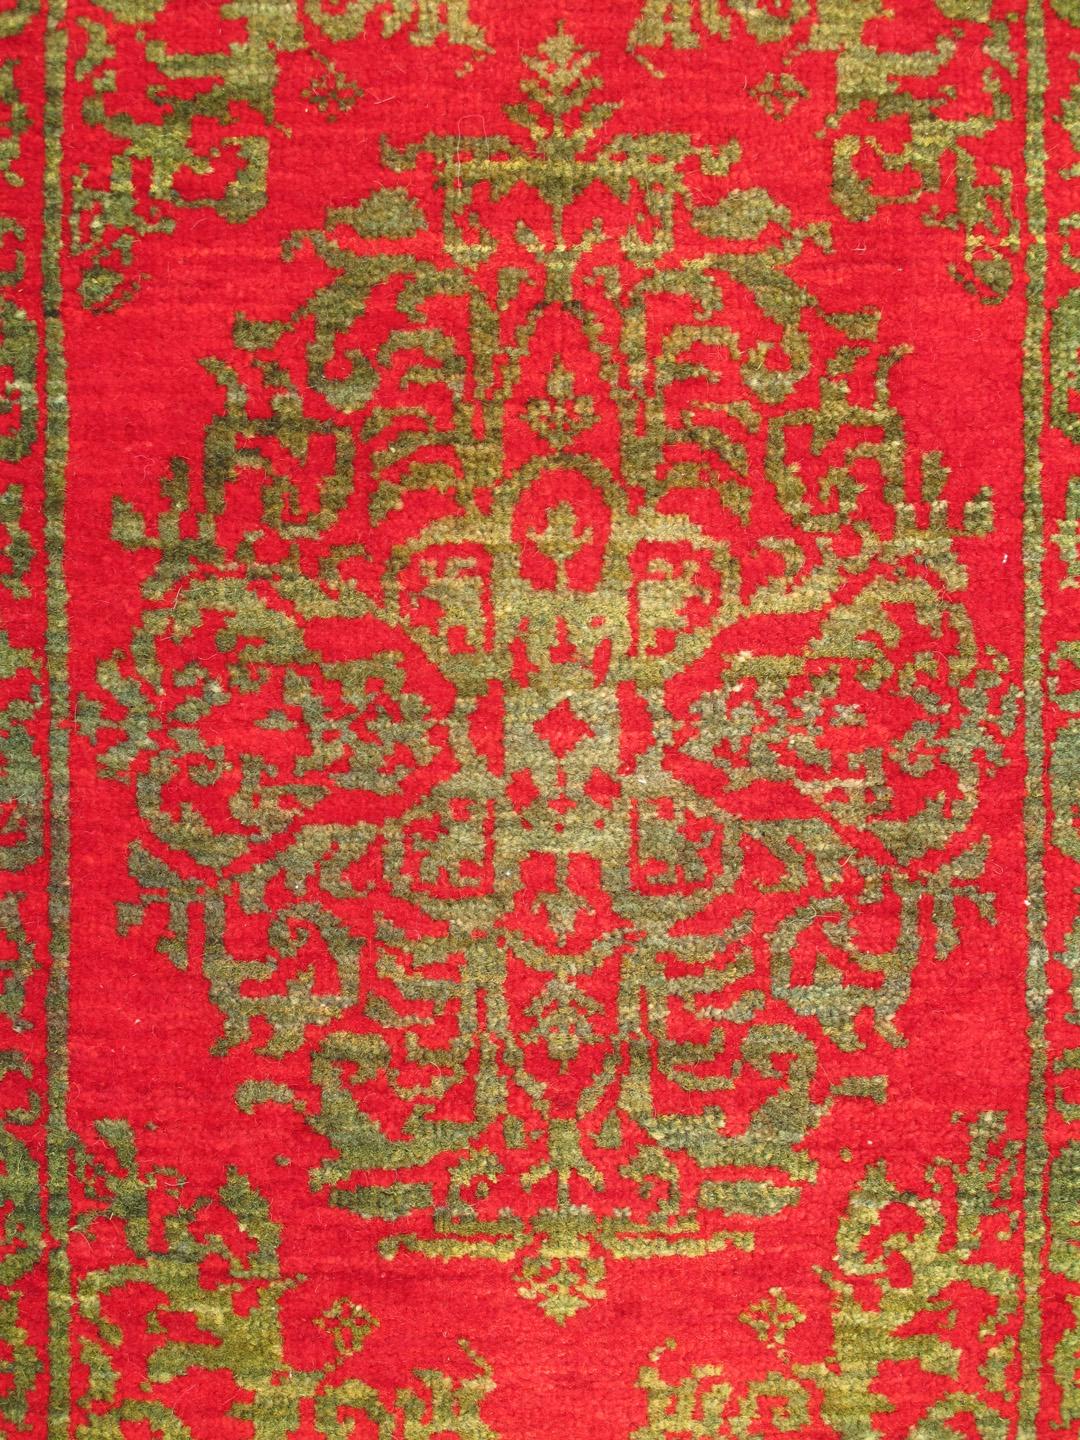 Antique Turkish ottoman rug with floral medallion in red and green, Keivan Woven Arts rug TU-VEY-8, country of origin / type: Turkey / Ottoman, circa 1920

Handwoven in Turkey, antique Ottoman rug creates a dynamic aesthetic through rich color and